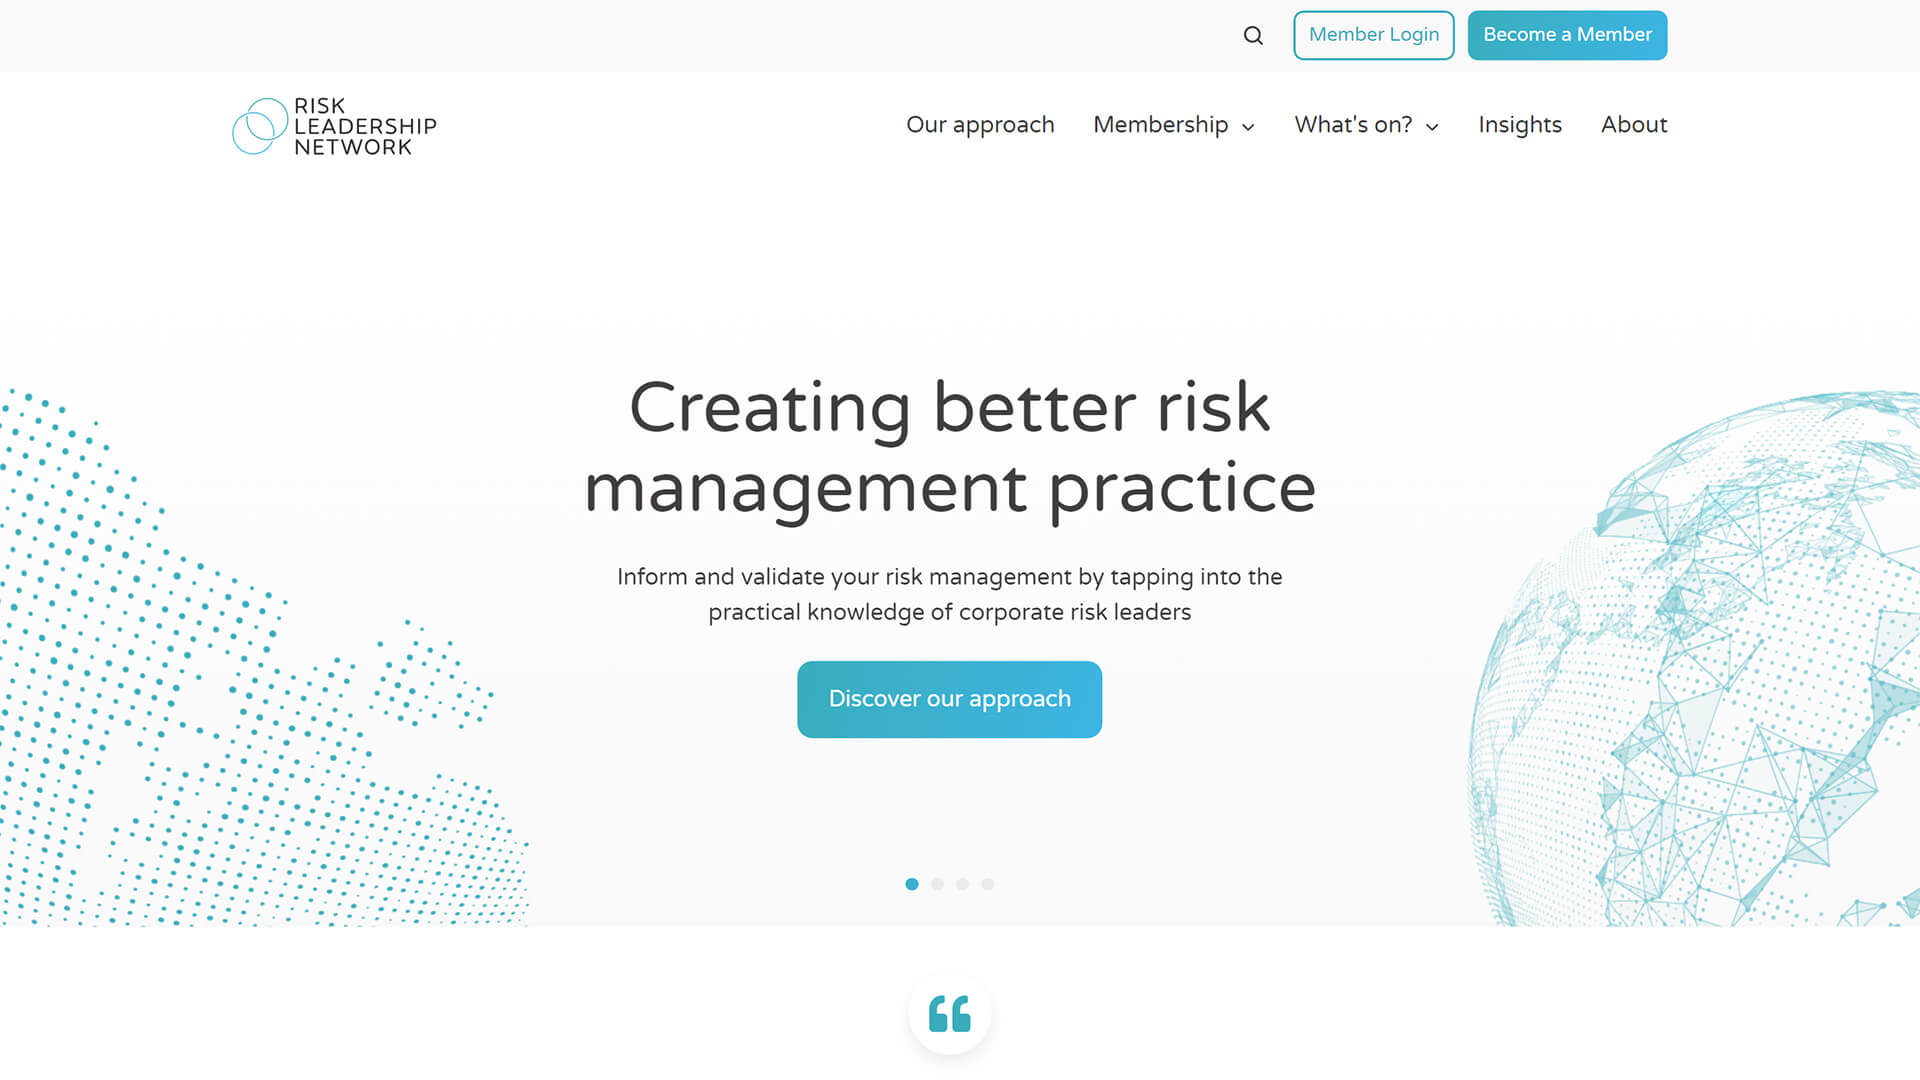 The beautiful riskleadershipnetwork.com website created with Act3 on the HubSpot CMS